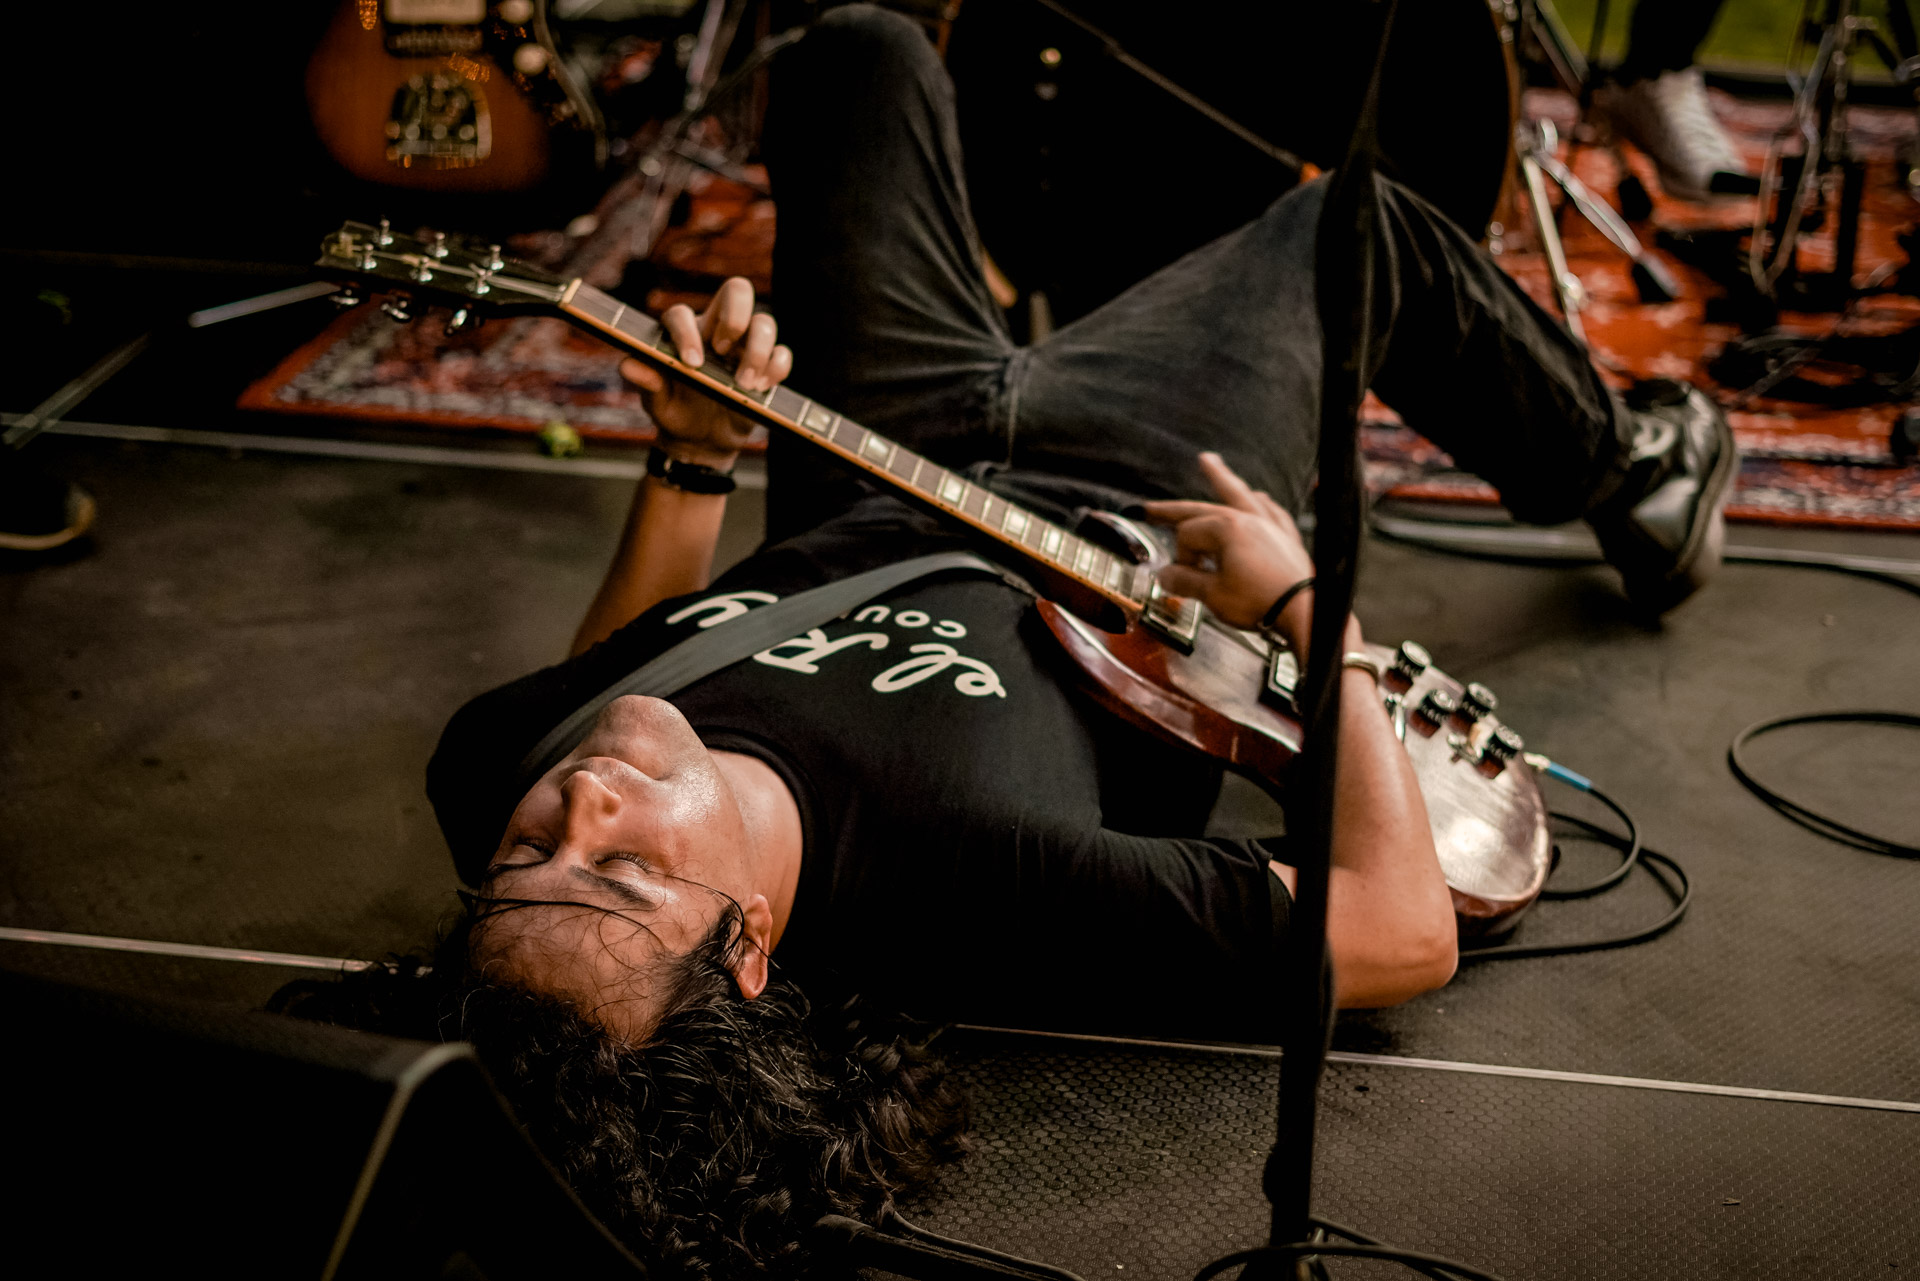 A musician laying on stage playing guitar